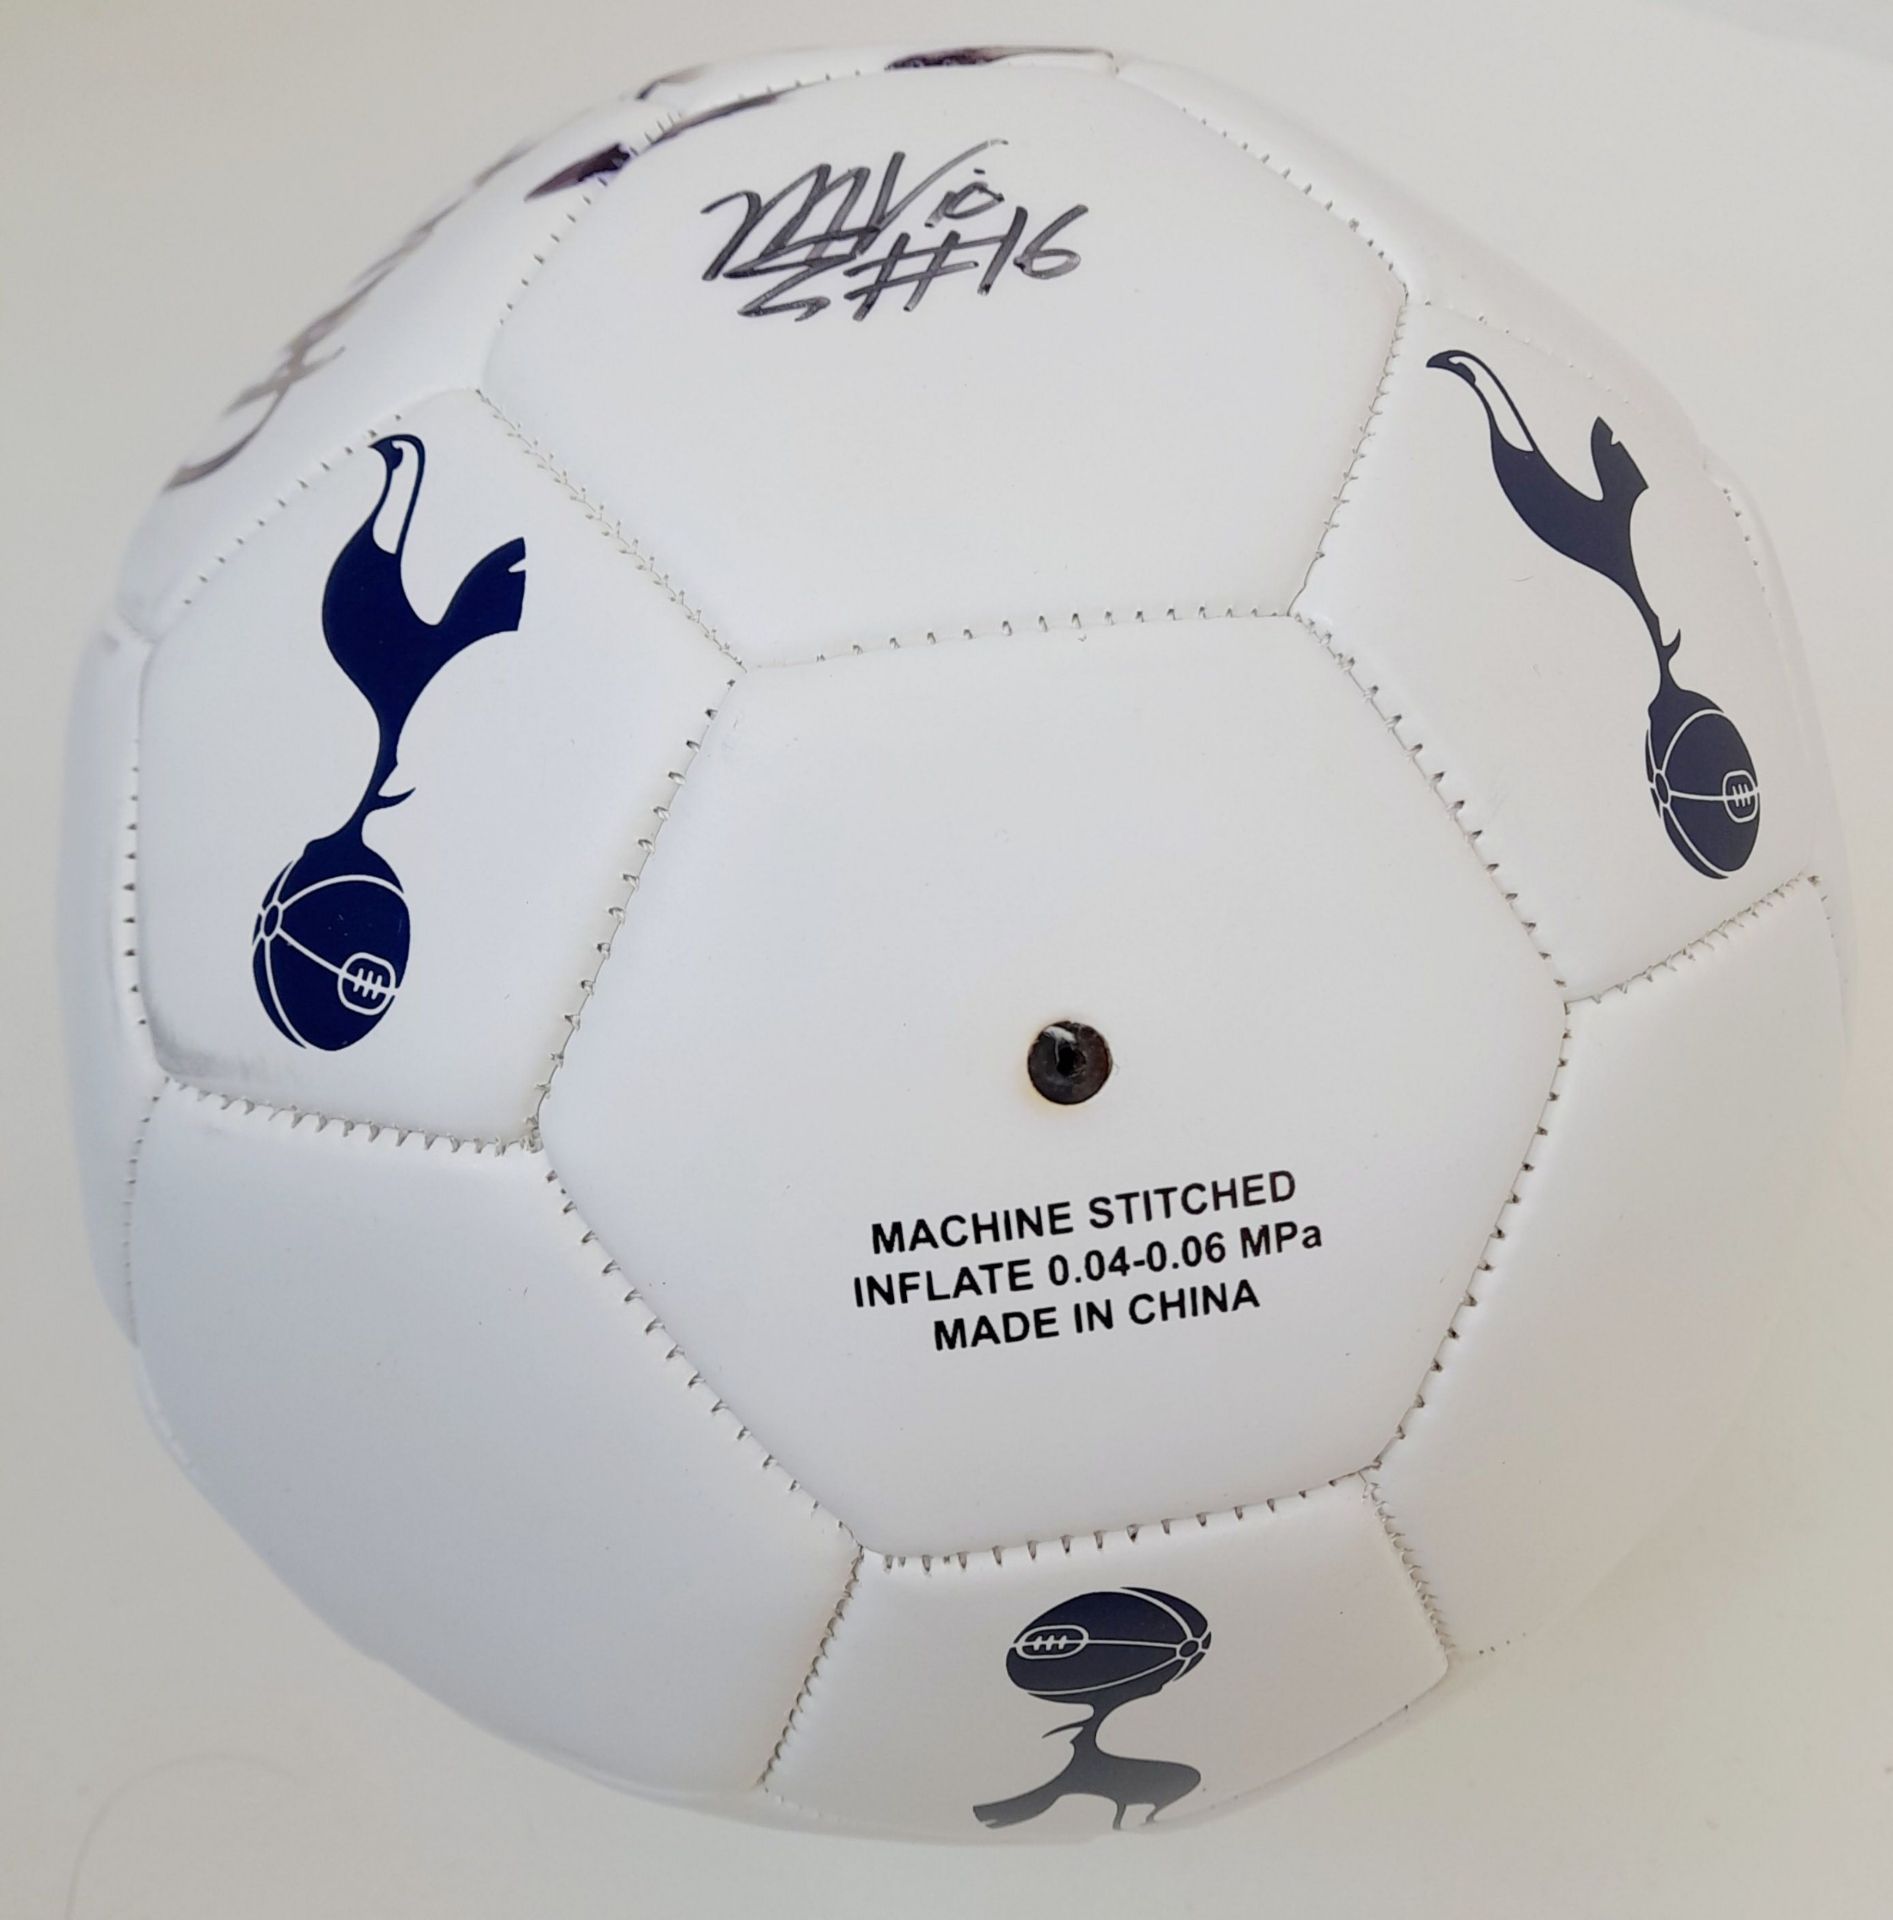 A Tottenham FC Official Signature Signed Football - Spurs Ladies! - Image 5 of 5